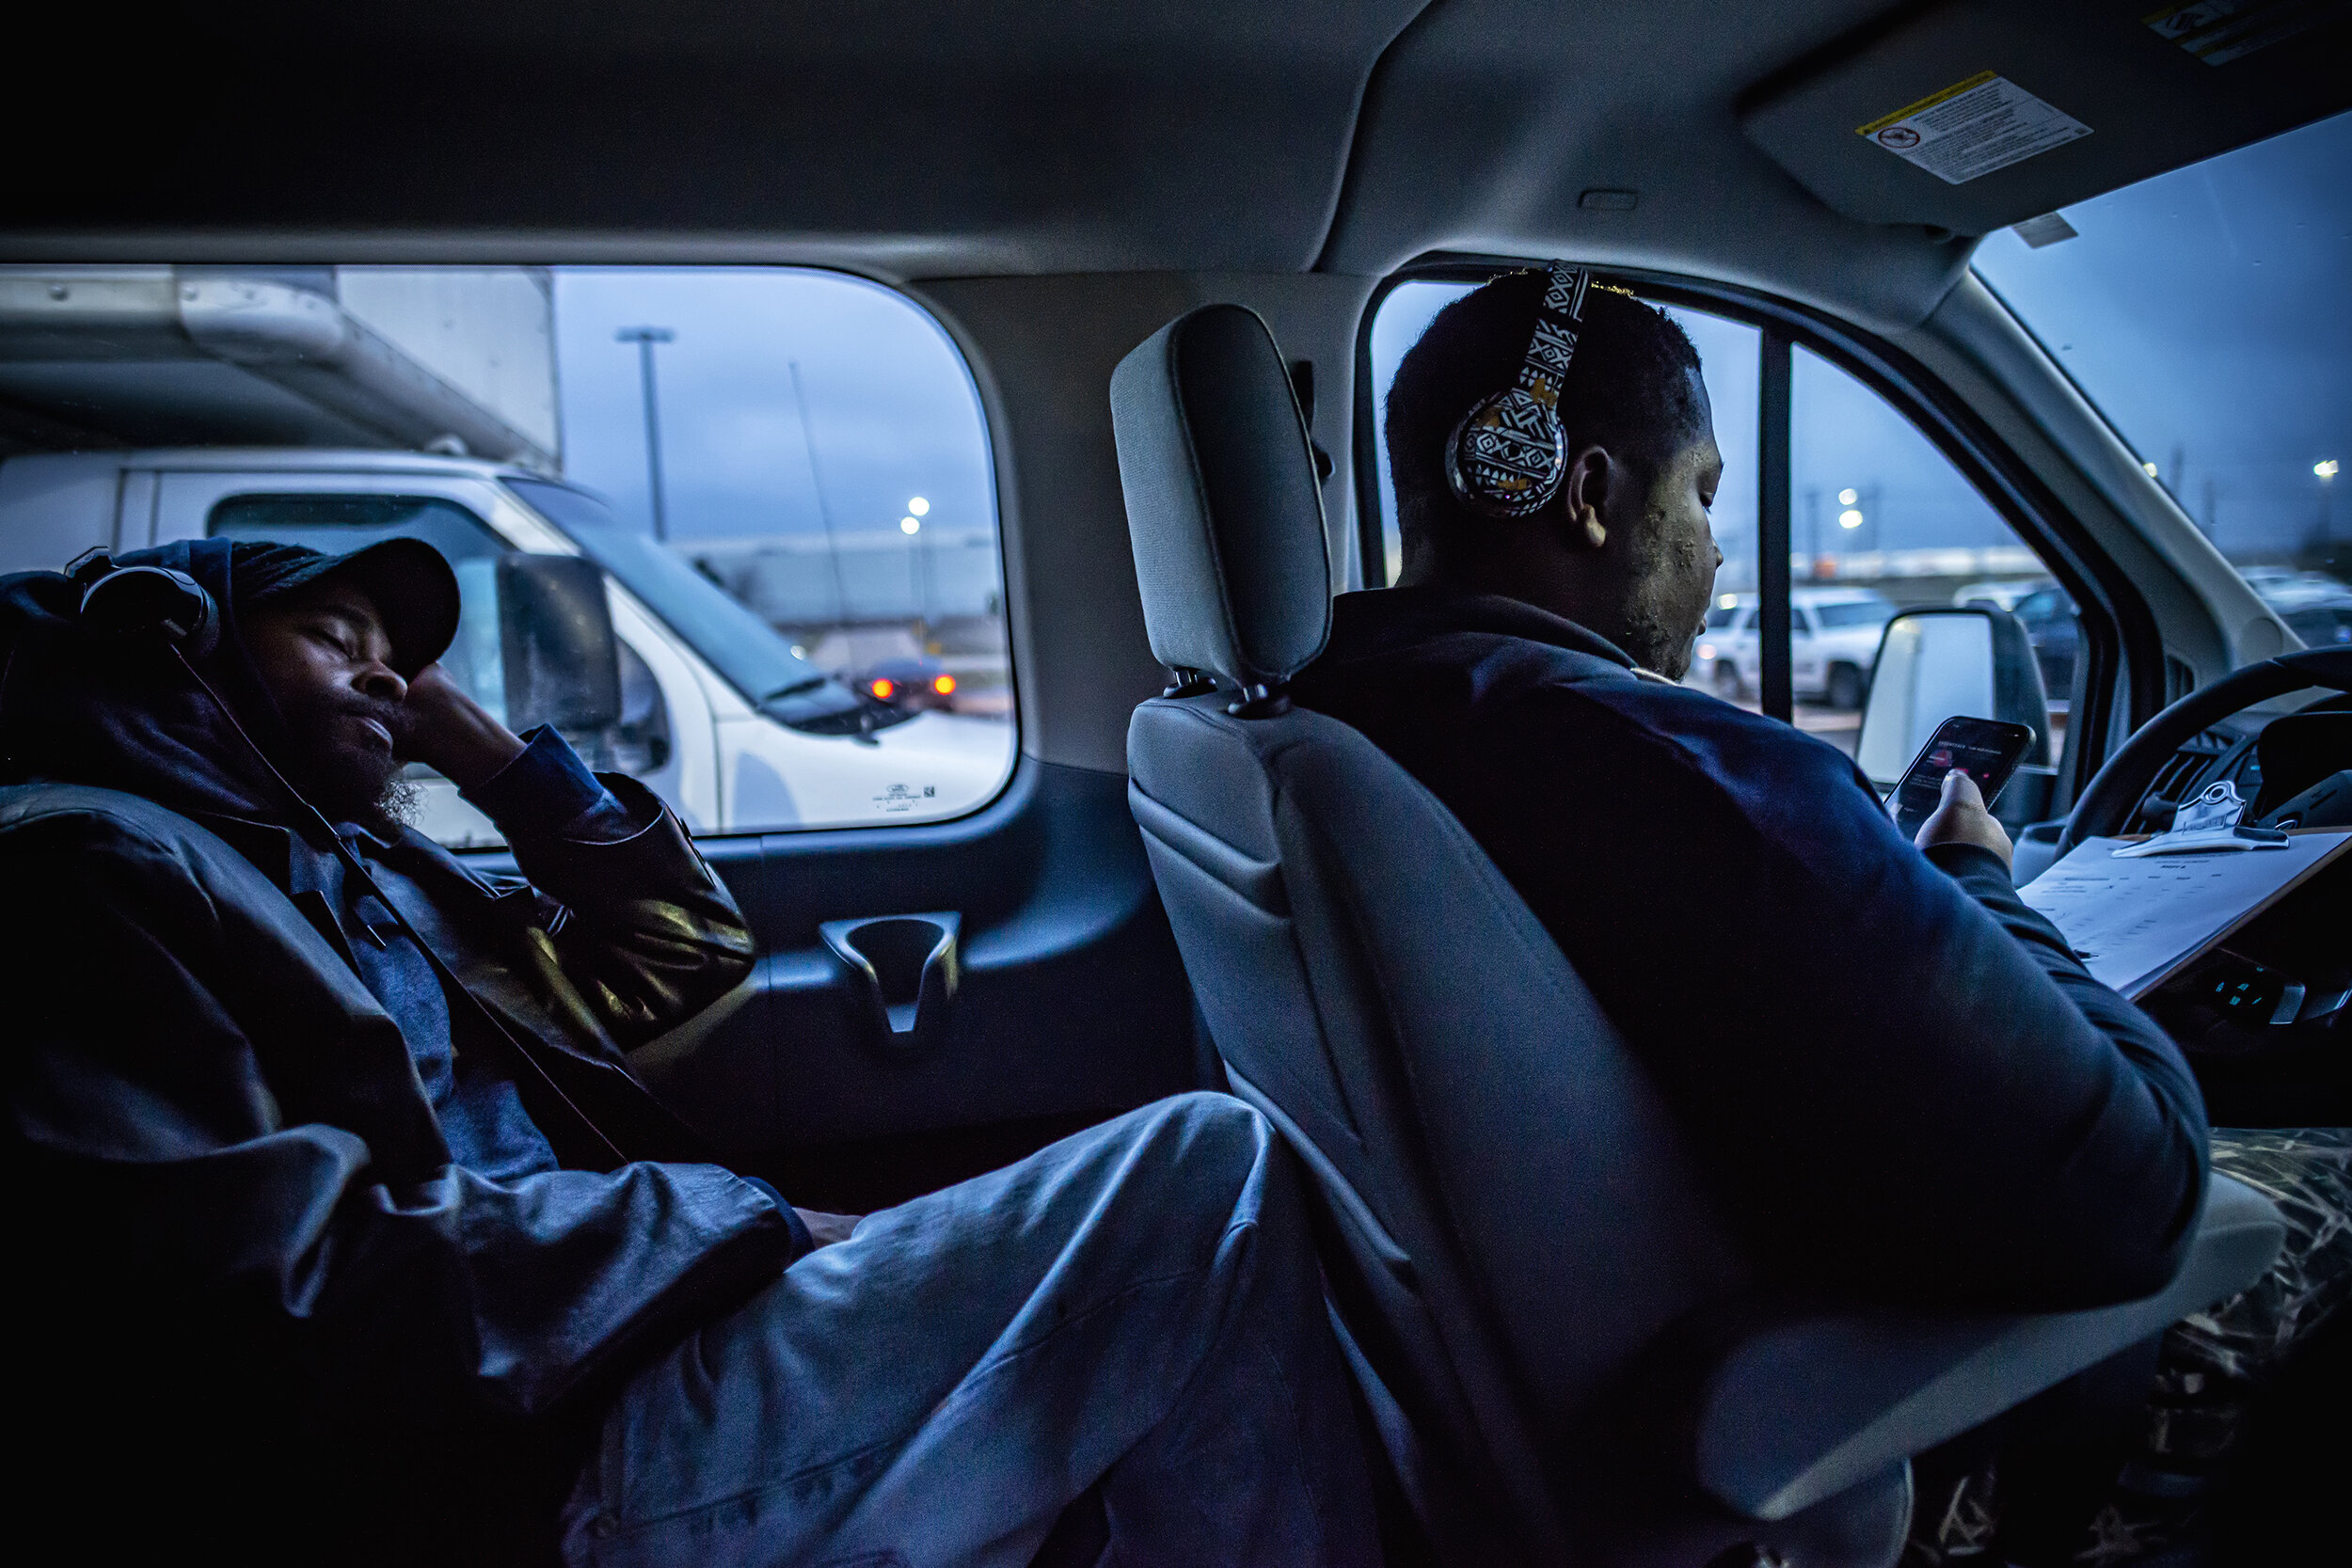  Demarcus Corbins phones a fare while a factory worker sleeps after his night shift at a Sterlite plastic factory in Ennis, TX.  Corbins worked with his father, Curtis Corbins, who started the nonprofit Southern Dallas Link. With shortfalls in public